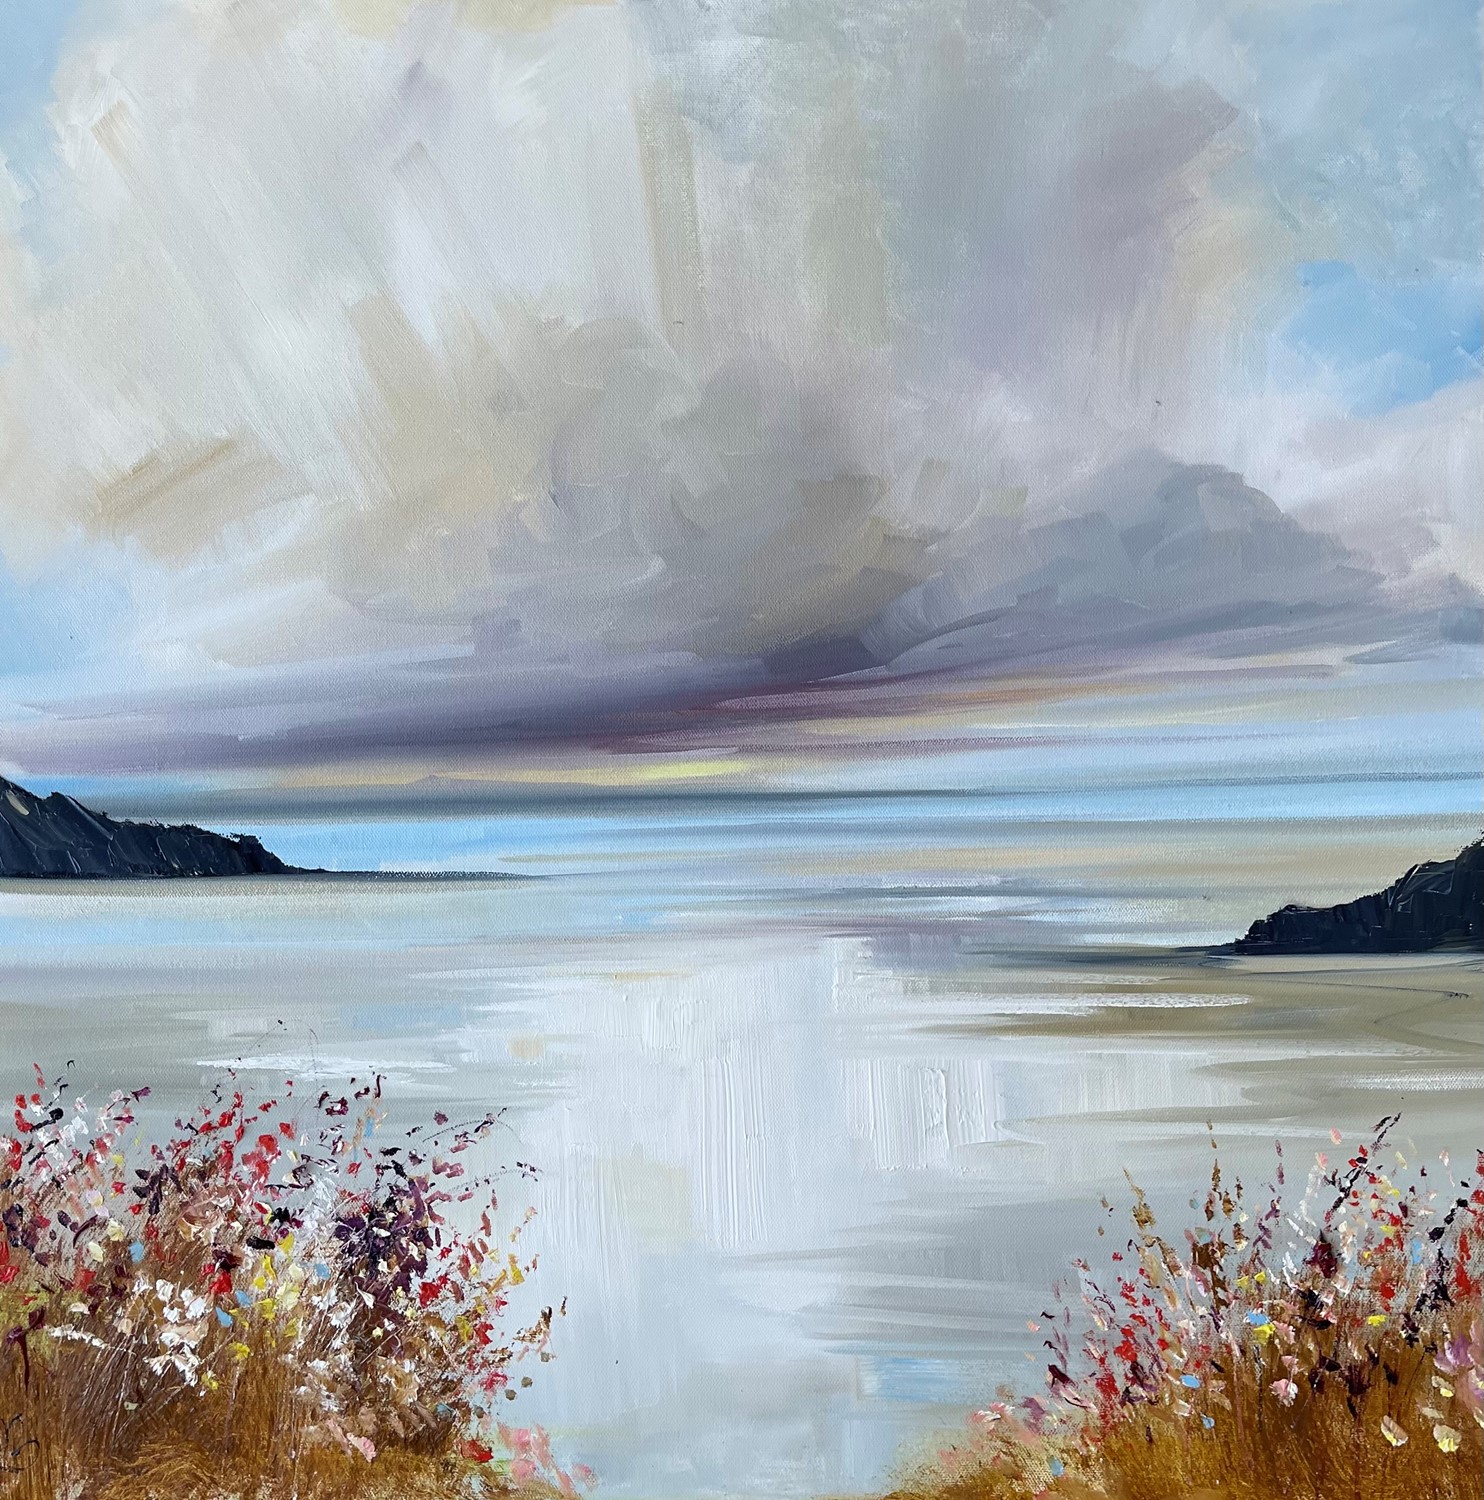 'At Low tide through the florals ' by artist Rosanne Barr